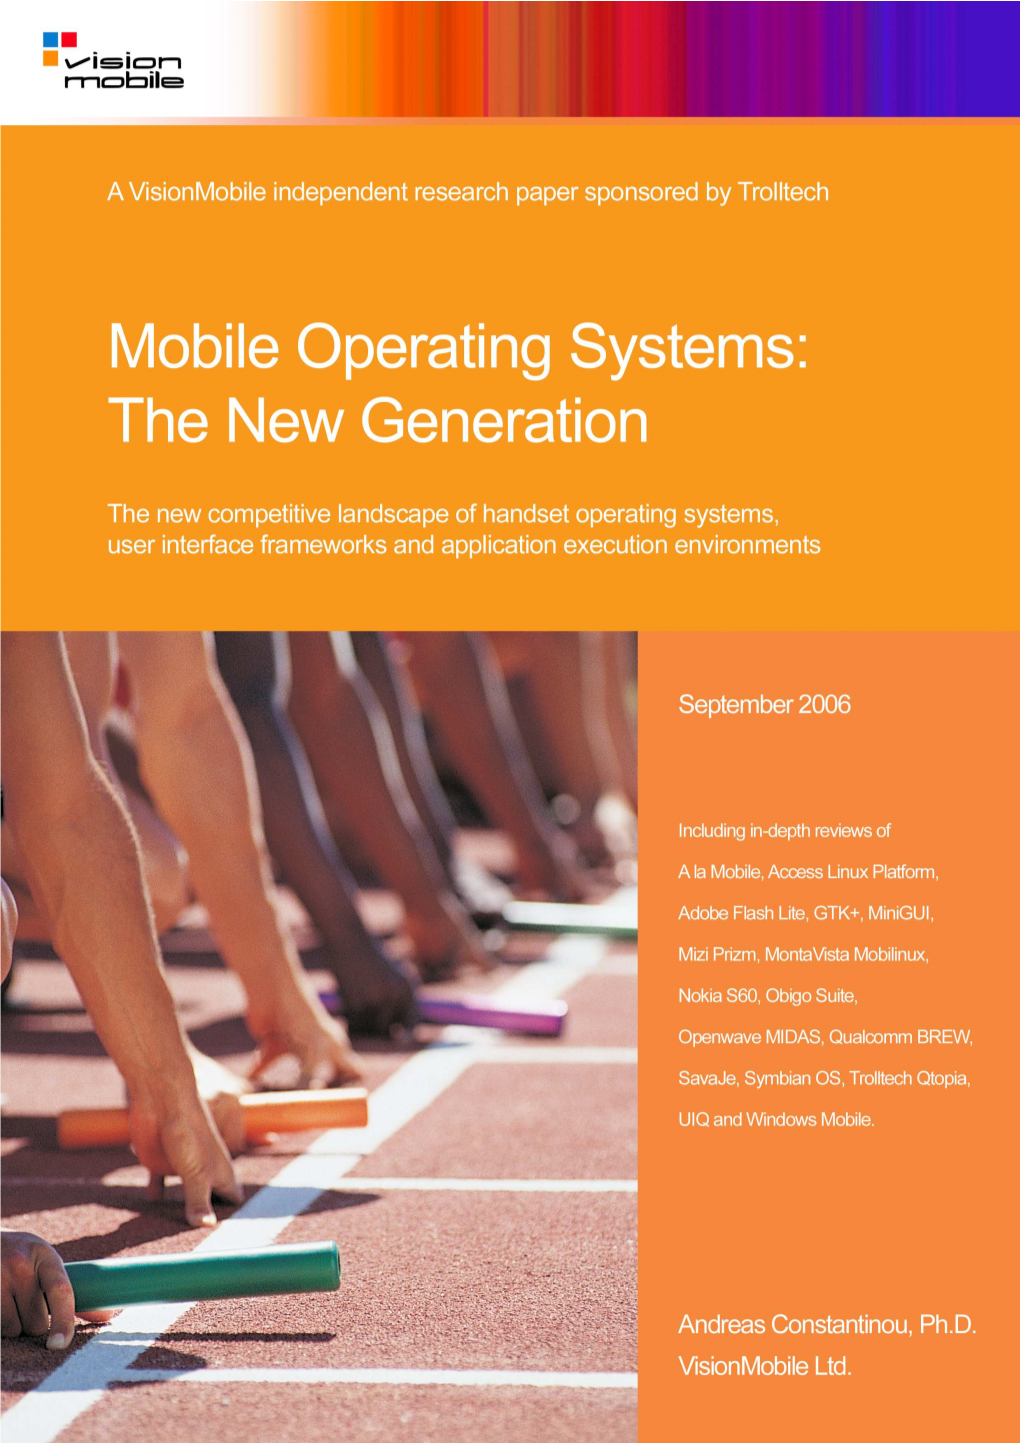 Mobile Operating Systems, the New Generation V1.01 FINAL